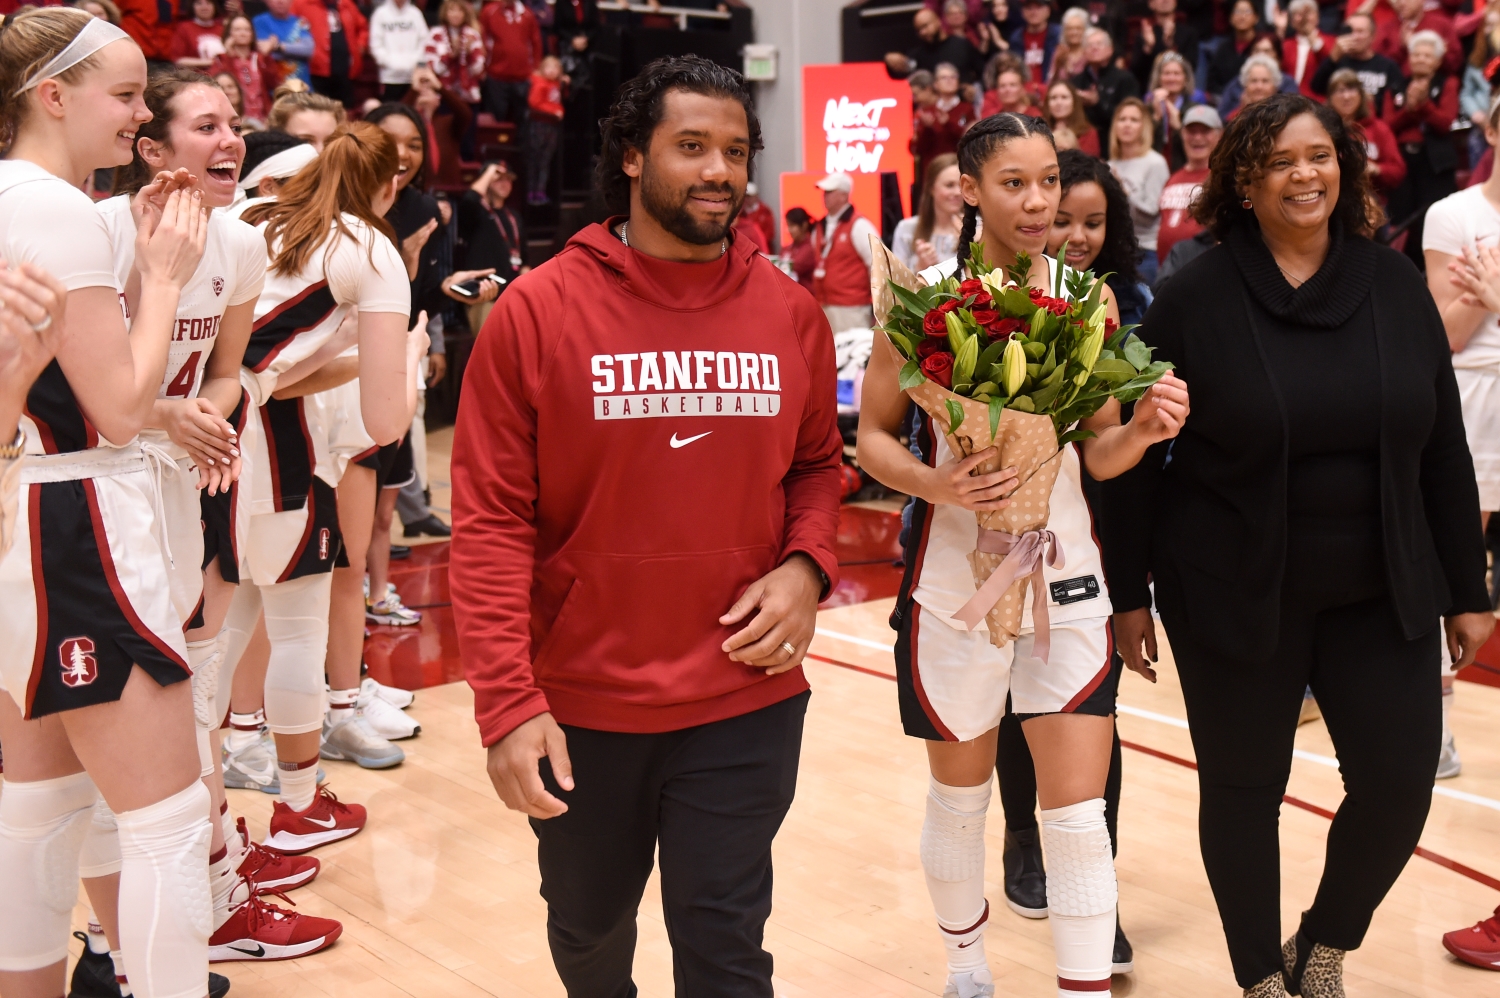 Seattle Seahawks quarterback Russell Wilson walks next to his sister, Anna Wilson, and their mother, Tammy Wilson, to celebrate senior day at Stanford.